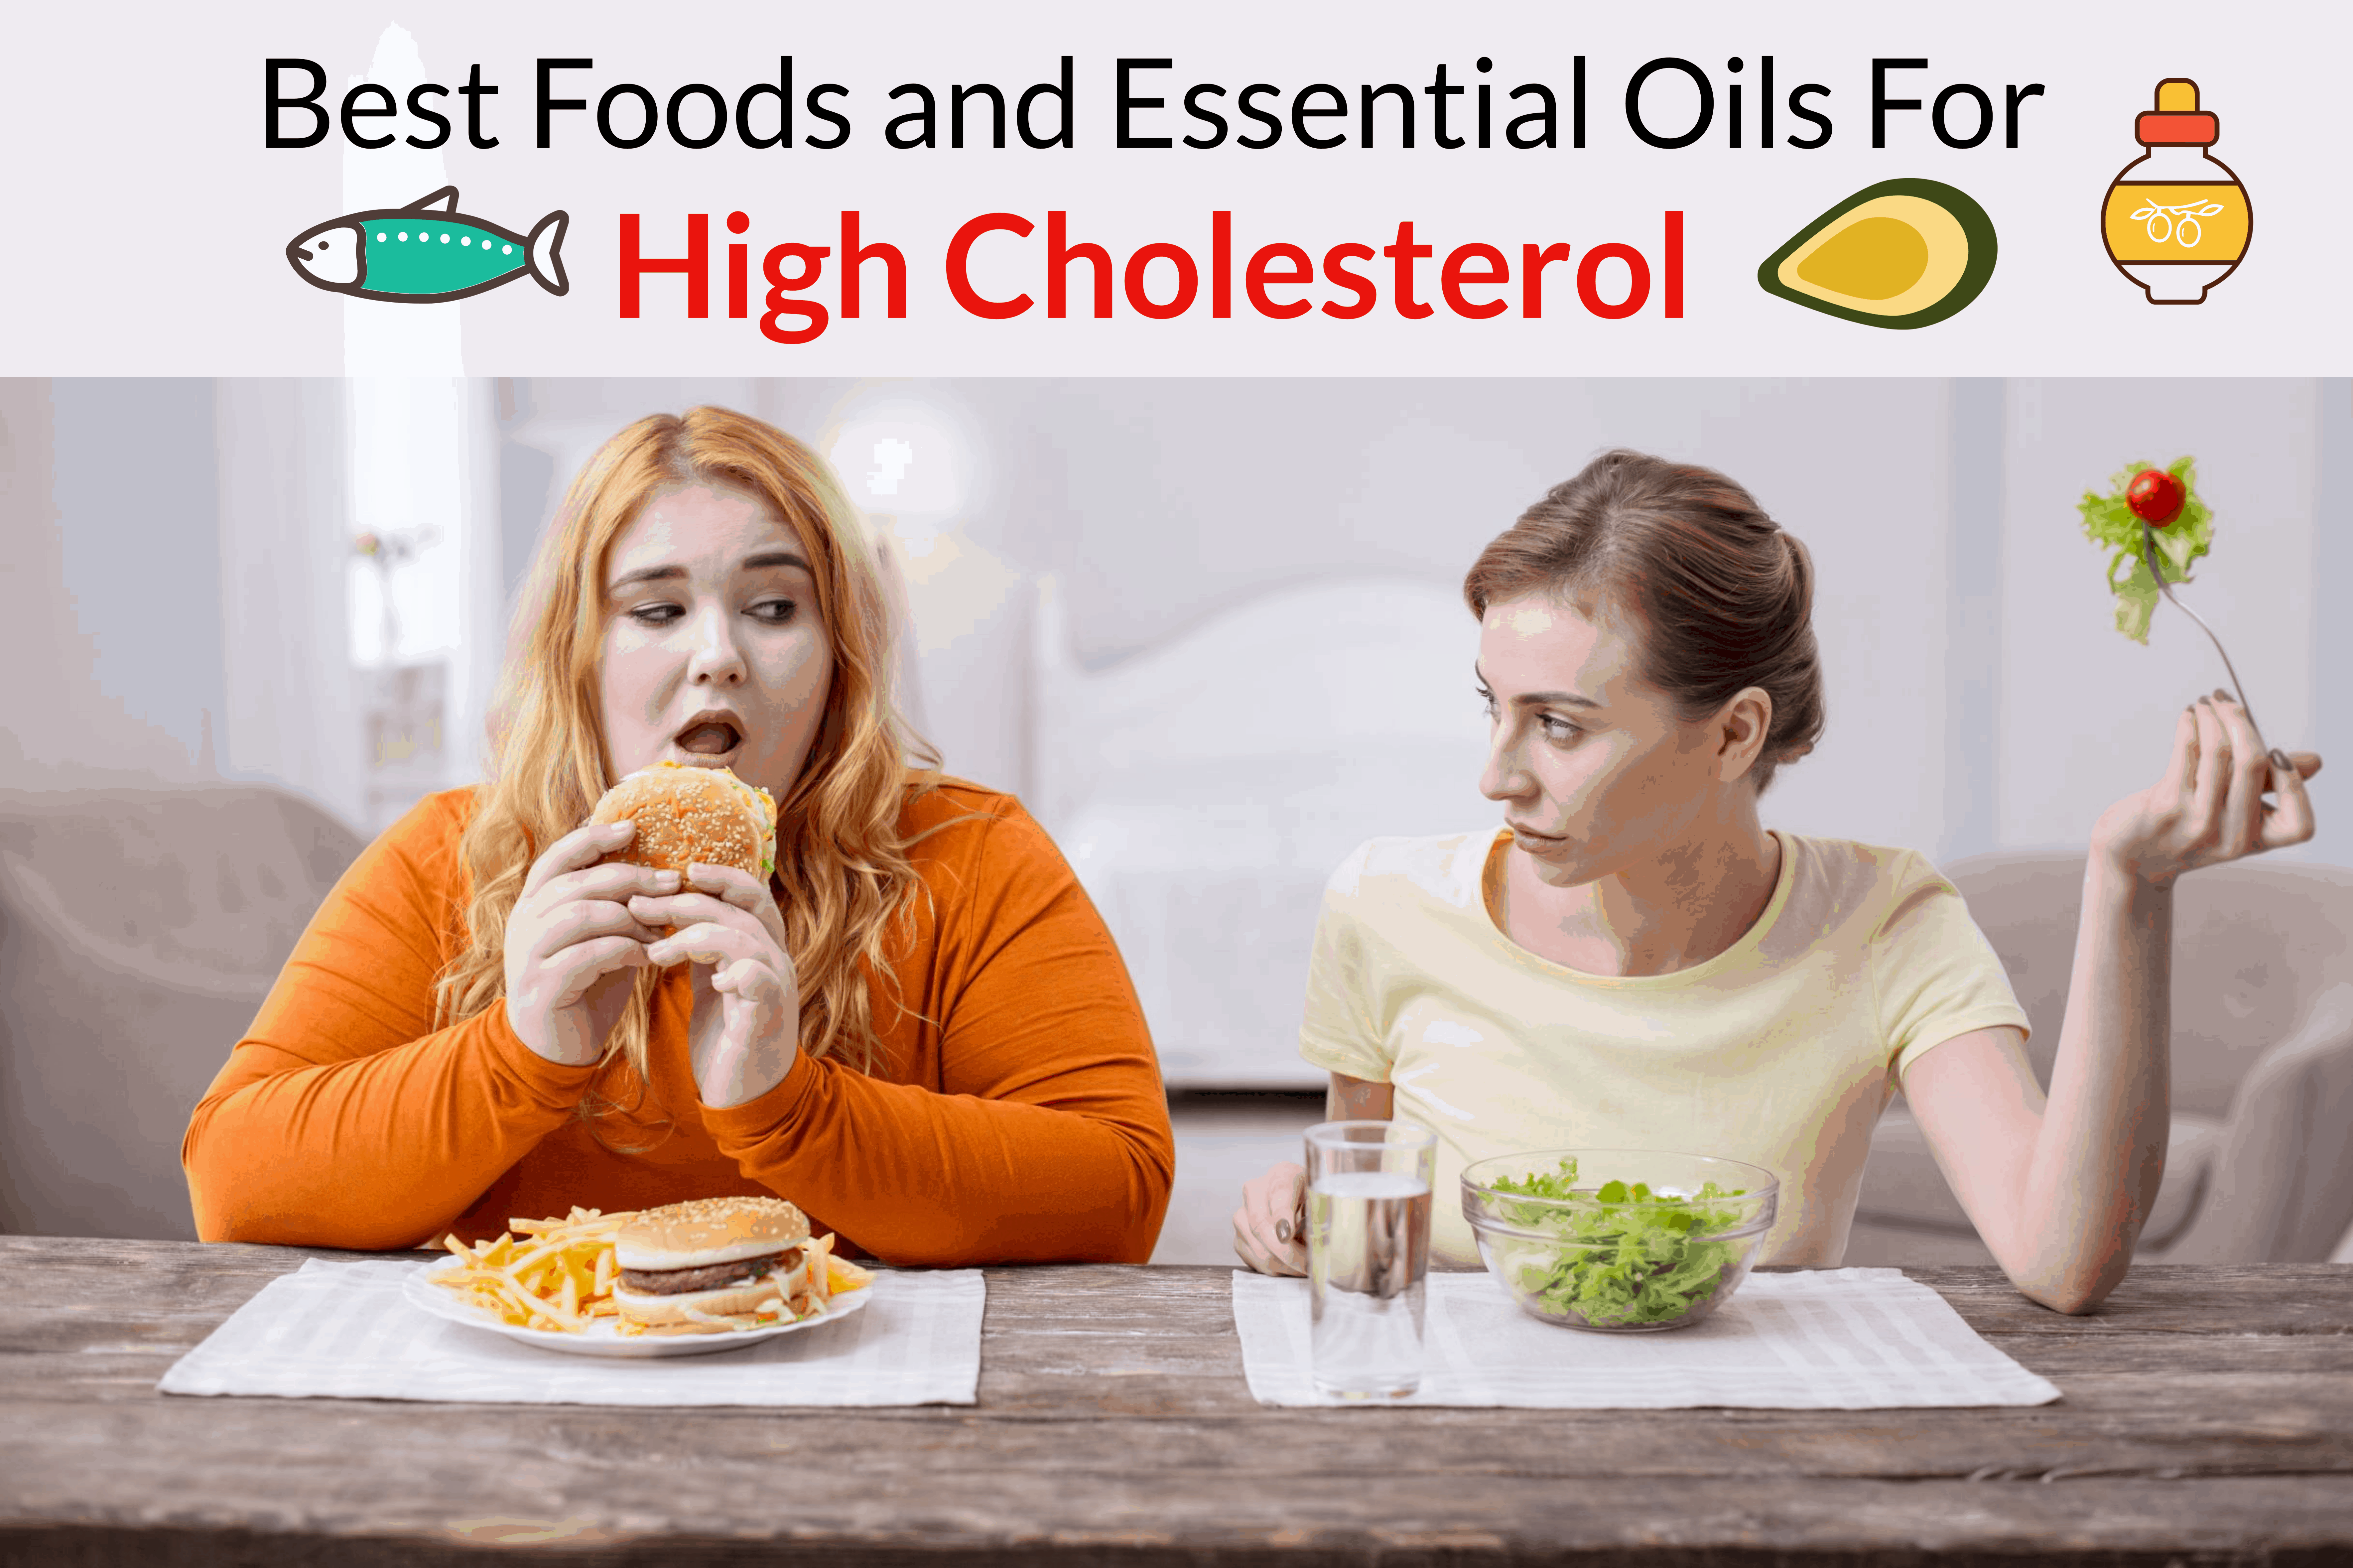 eo for High Cholesterol